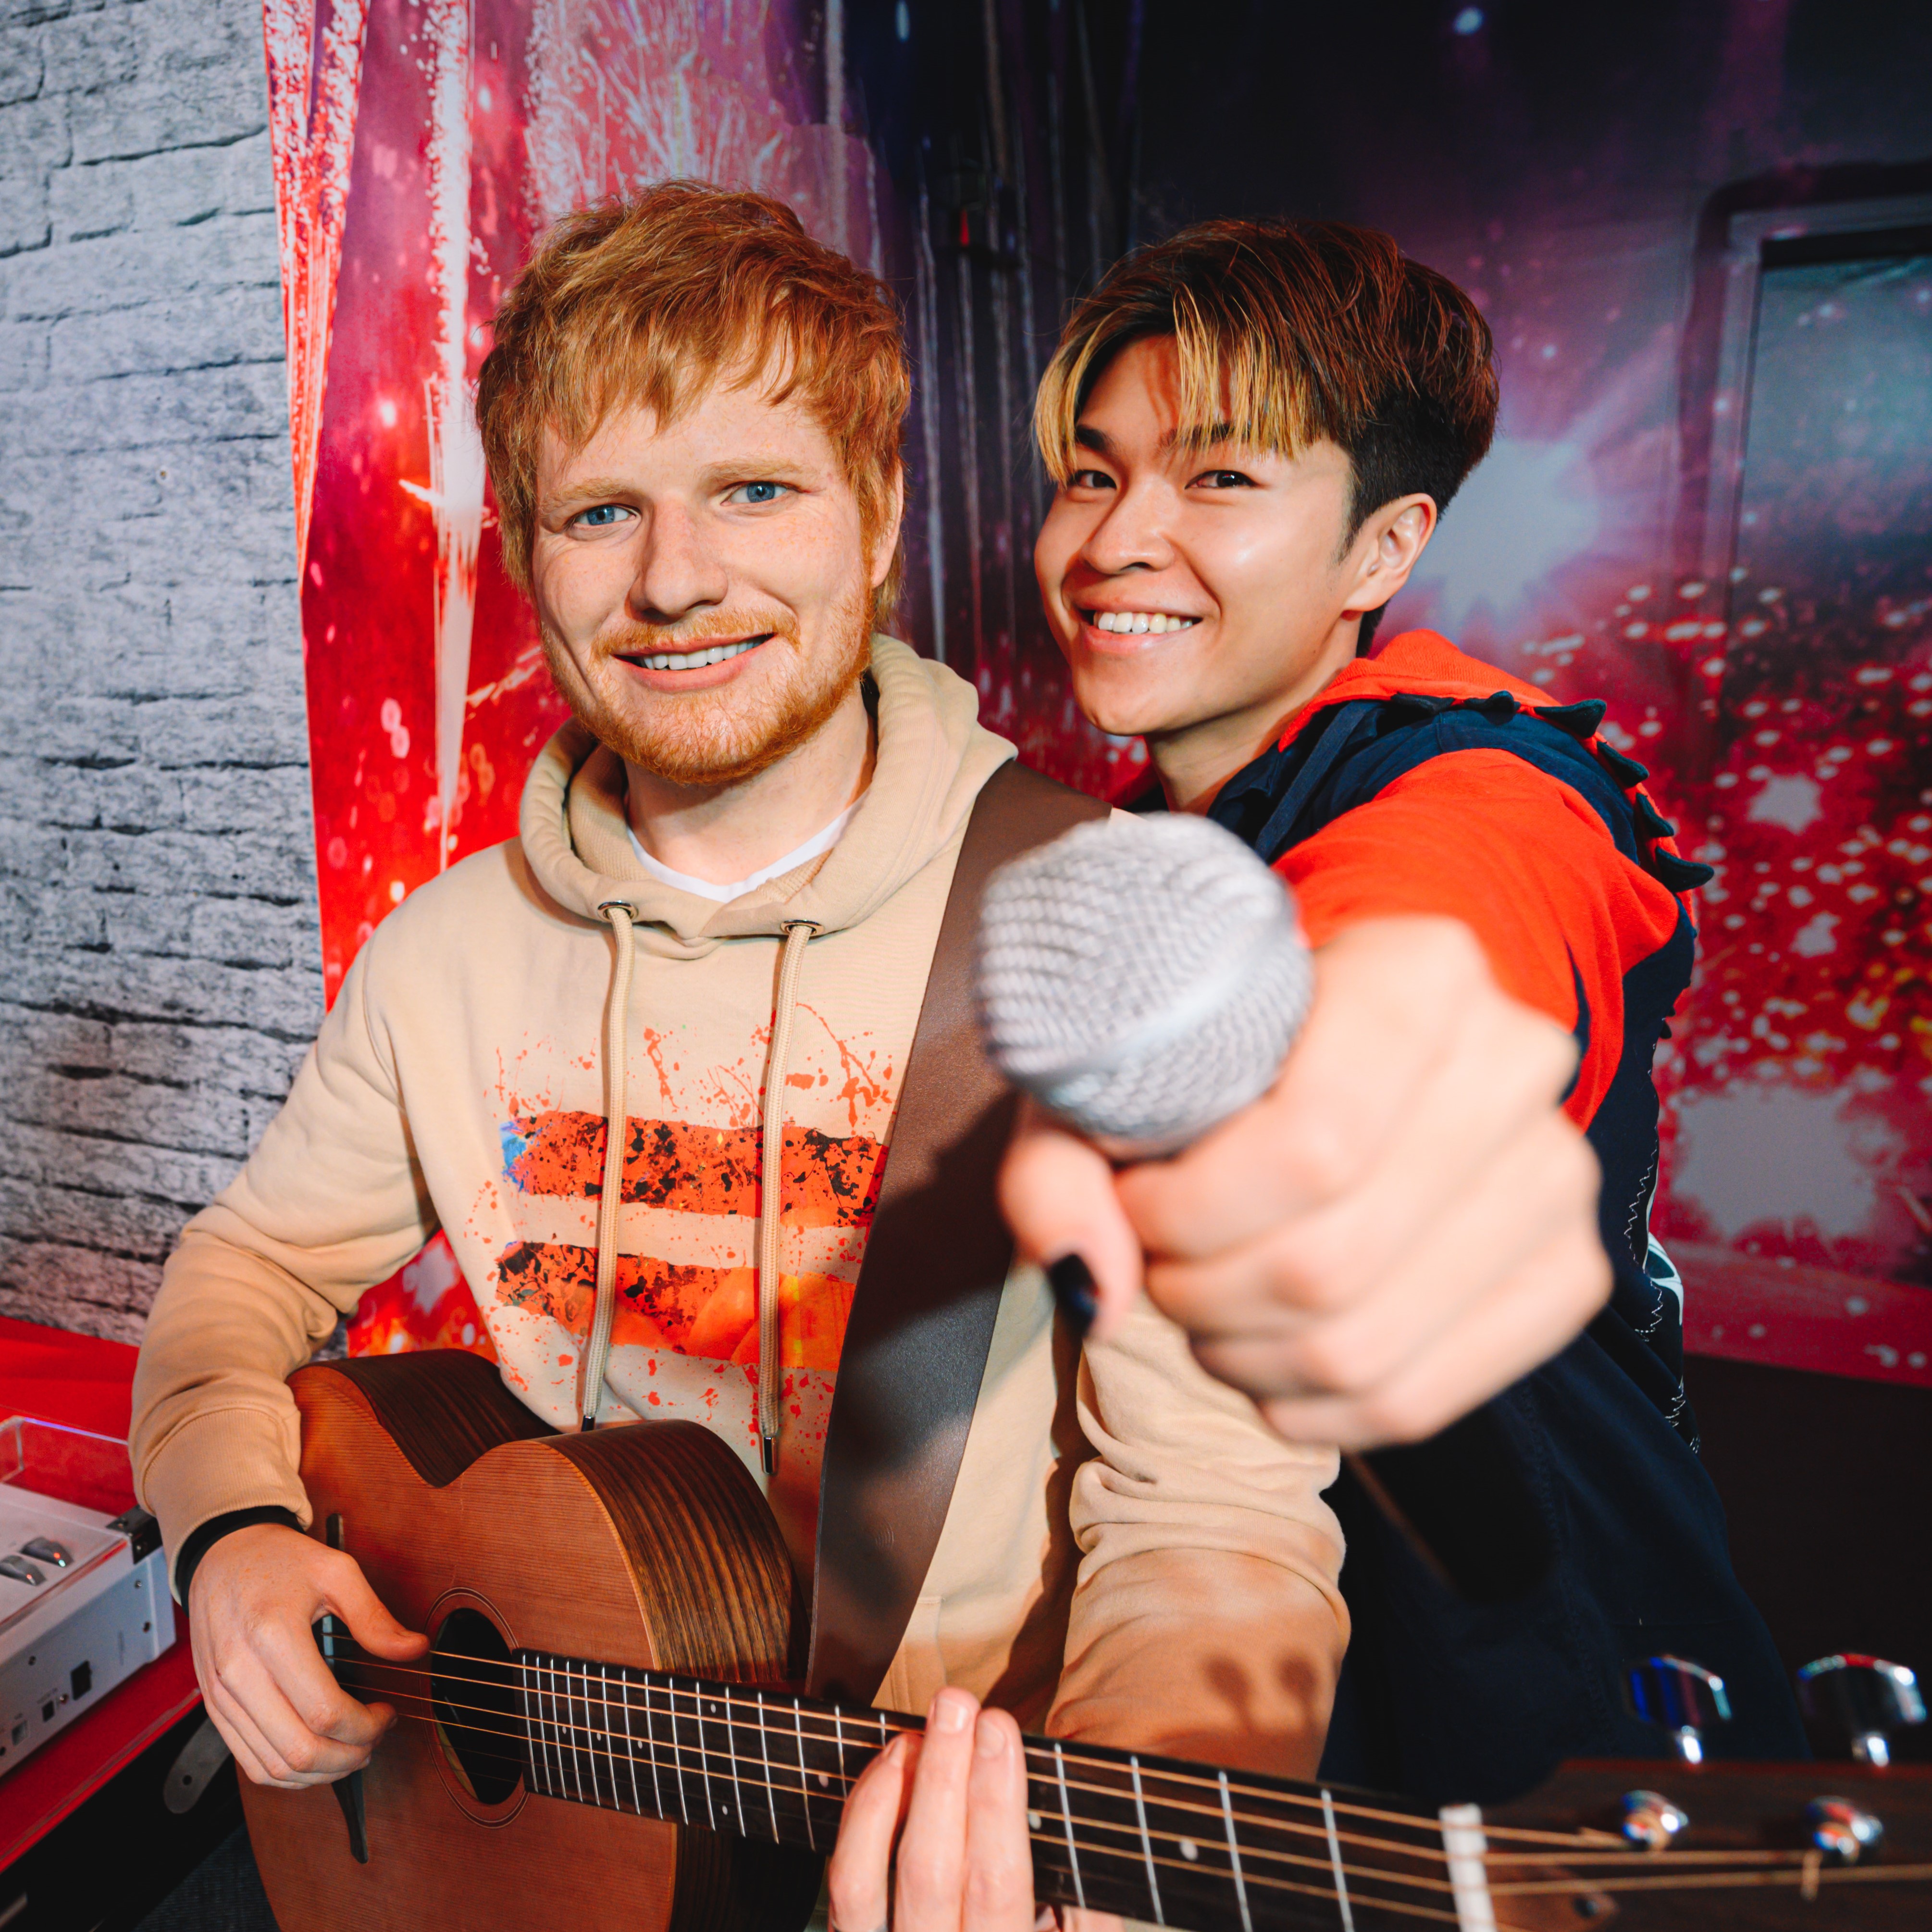 Pose with music icon Ed Sheeran at Madame Tussauds Hong Kong, one of the main indoor attractions in Hong Kong